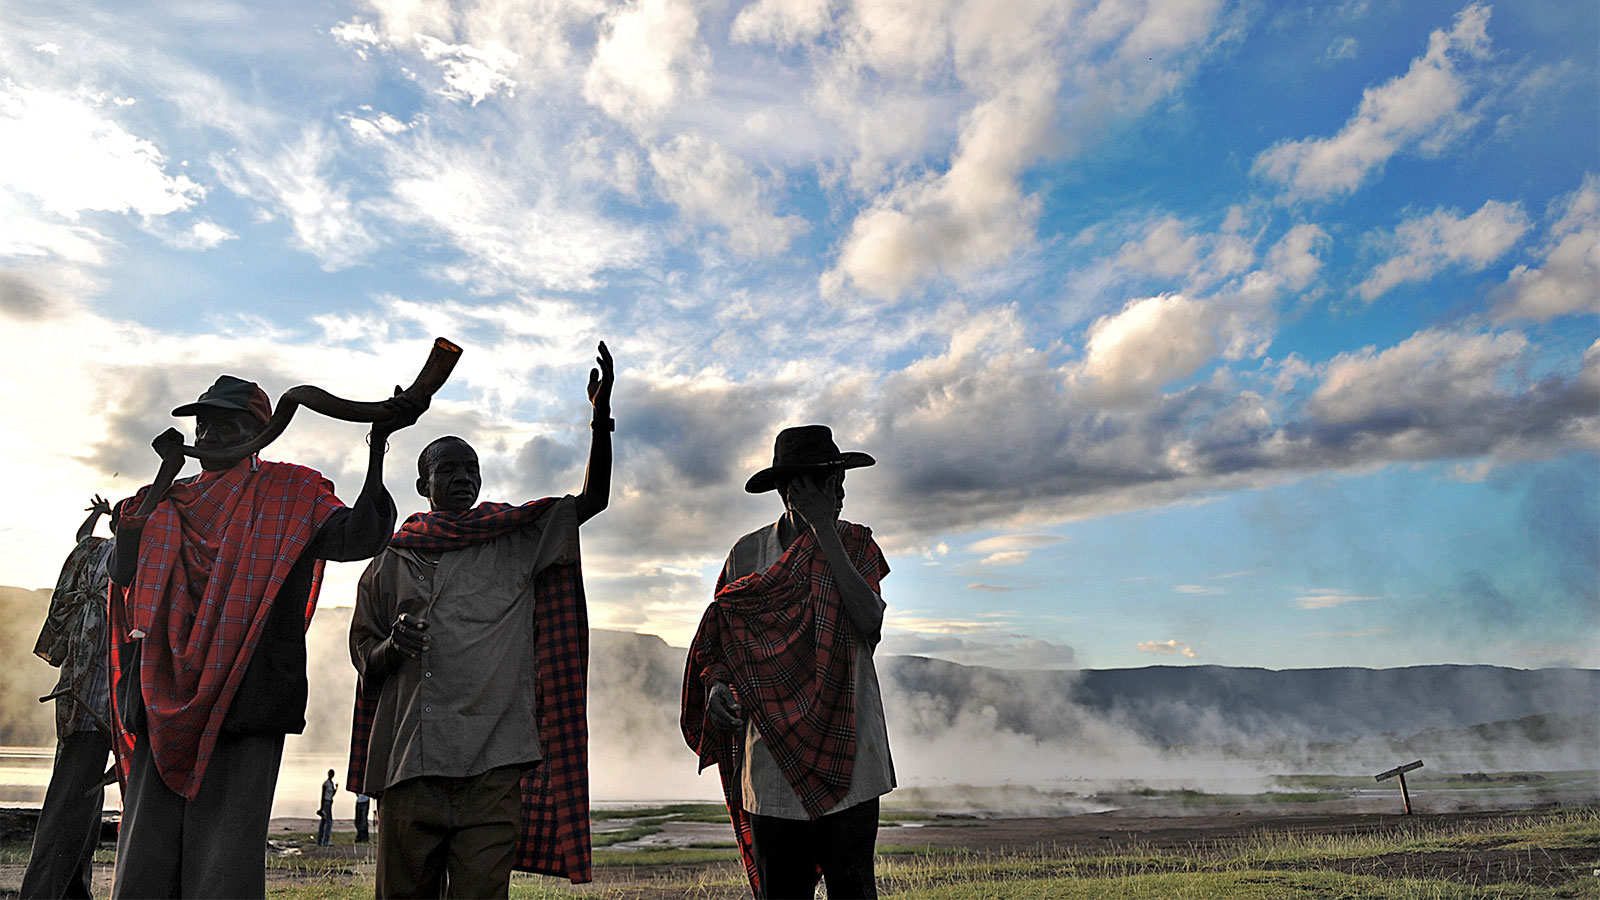 Four elders of the Endorois tribe, indigenous to Kenya, performing a ritual. Mist, mountains, and a blue sky with clouds are in the background